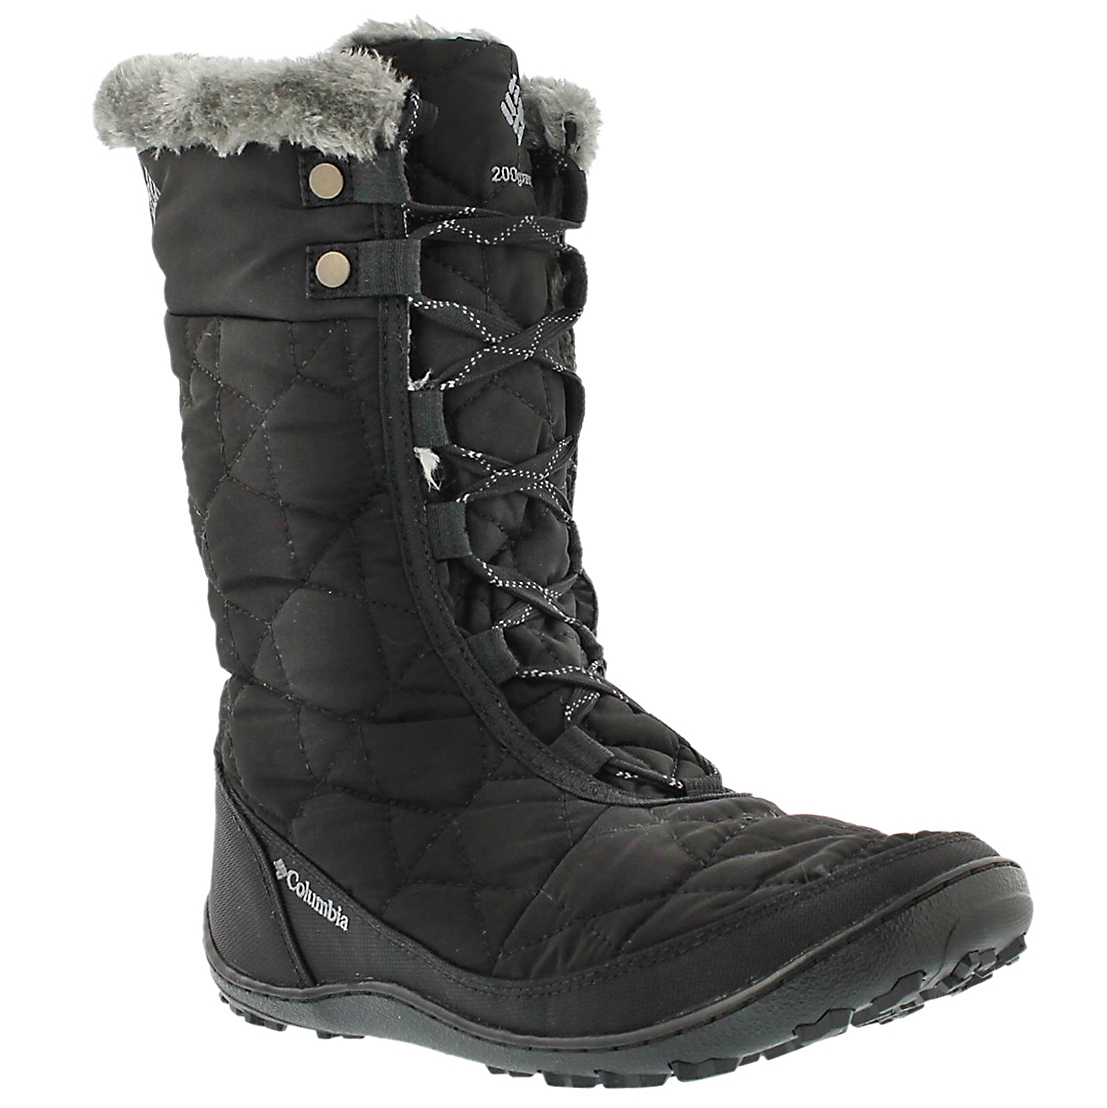 Womens Snow Boots Clearance | Cheap Cowboy Boots For Women 2017